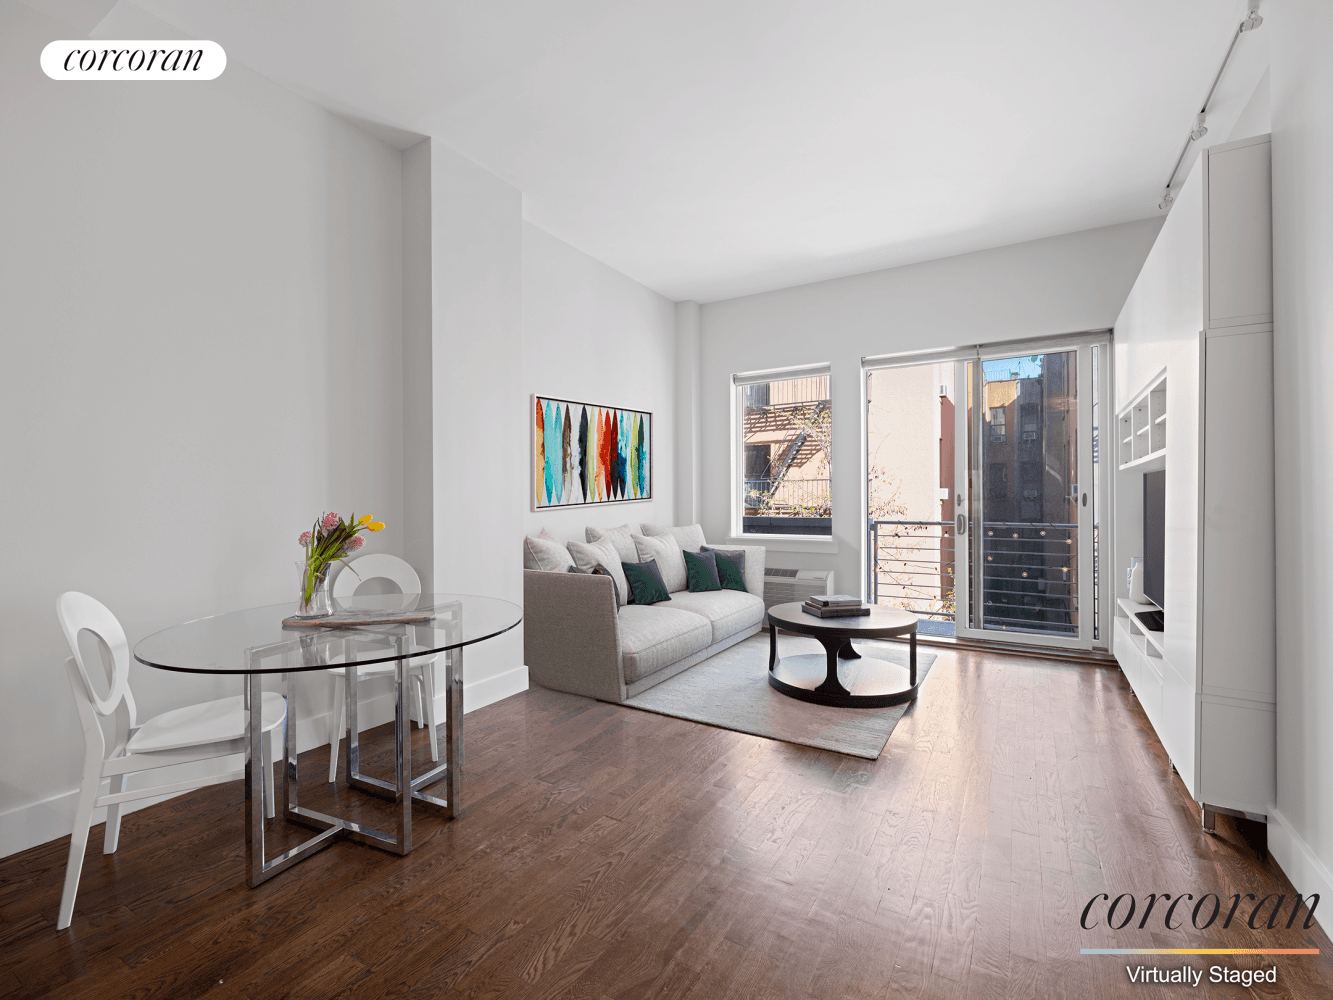 Generously proportioned and sun lit, 698sf one bedroom condominium in prime Lefferts Gardens with balcony, in unit laundry, and room for living room, dining table, and a king sized bed.